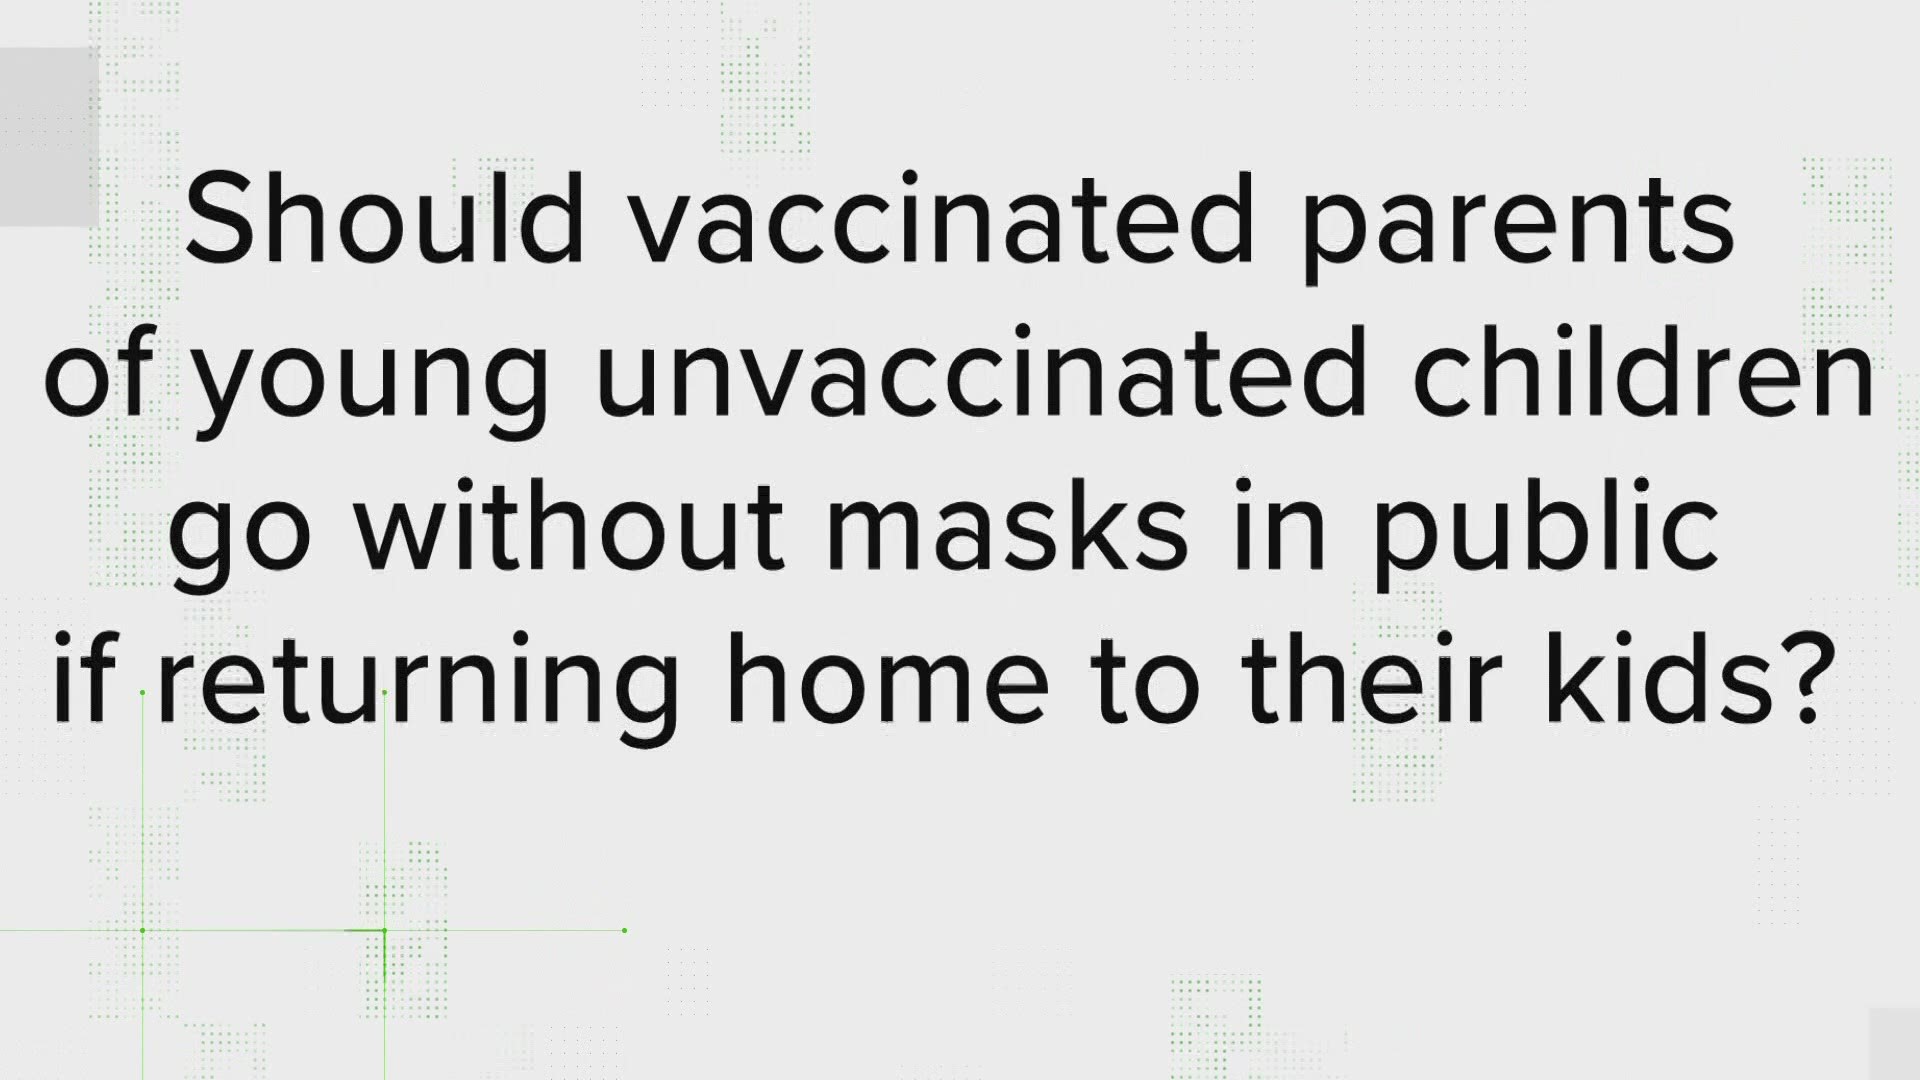 Should vaccinated parents of young unvaccinated children go without masks in public if returning home to their kids?